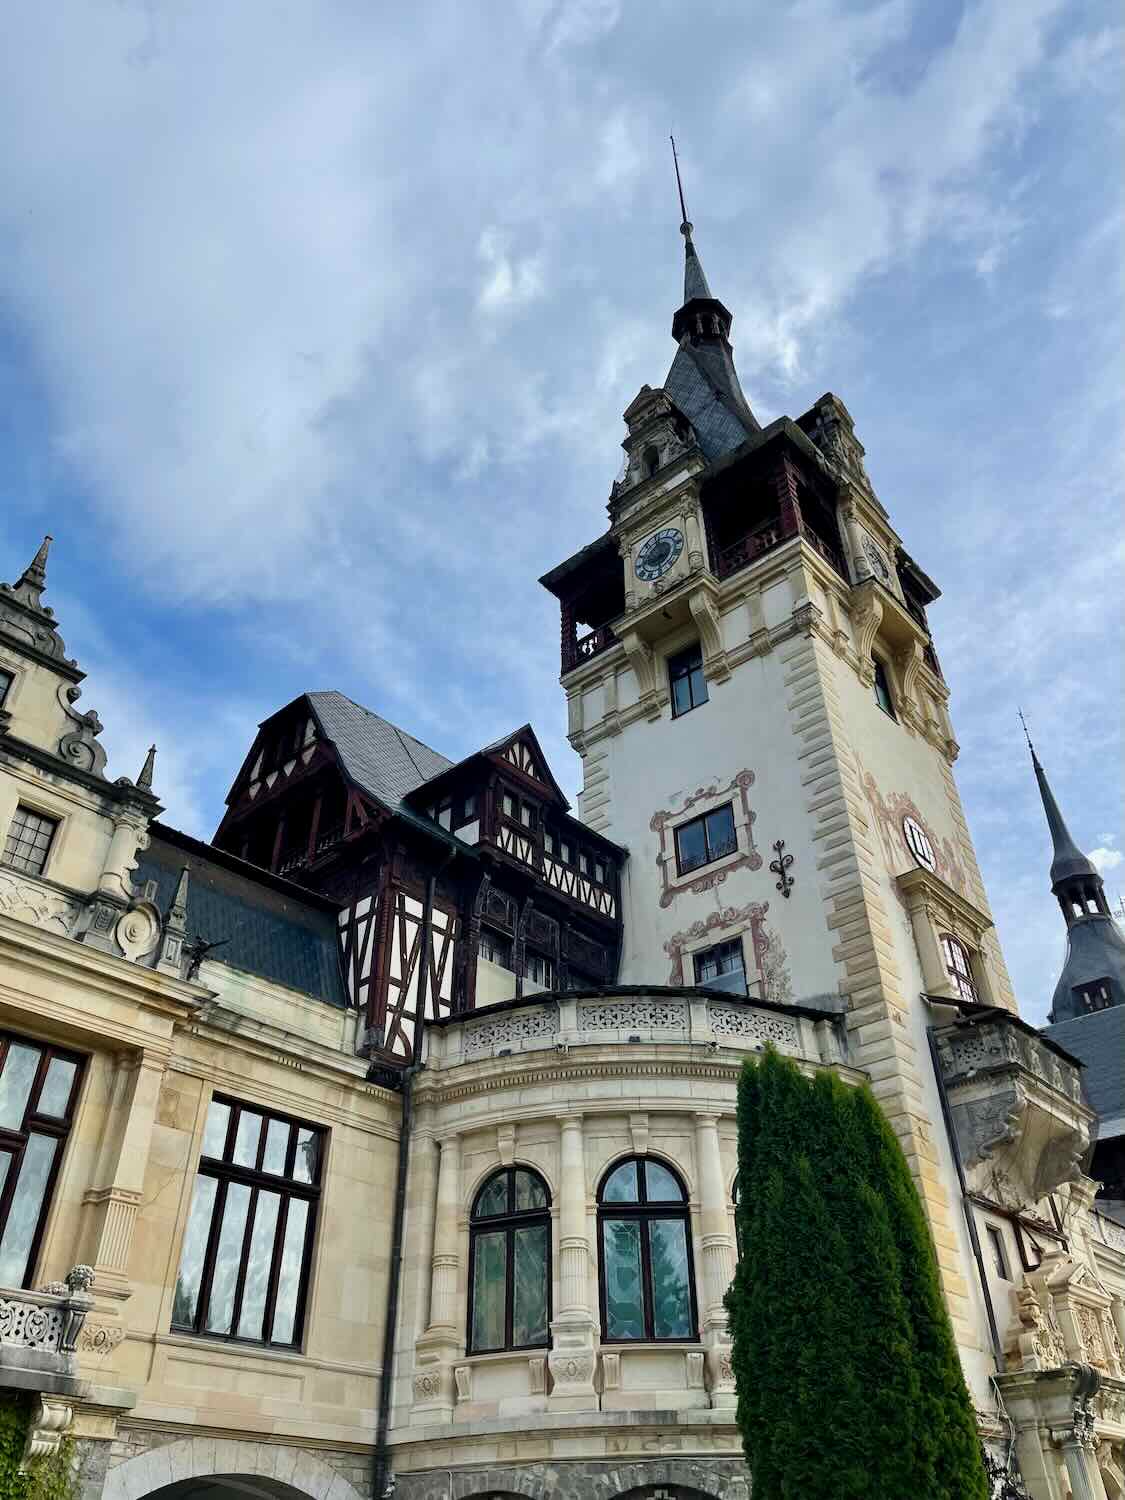 An exterior shot of Peles Castle showcasing its fairy-tale towers and mix of architectural styles, set against a backdrop of clear blue skies and fluffy clouds.